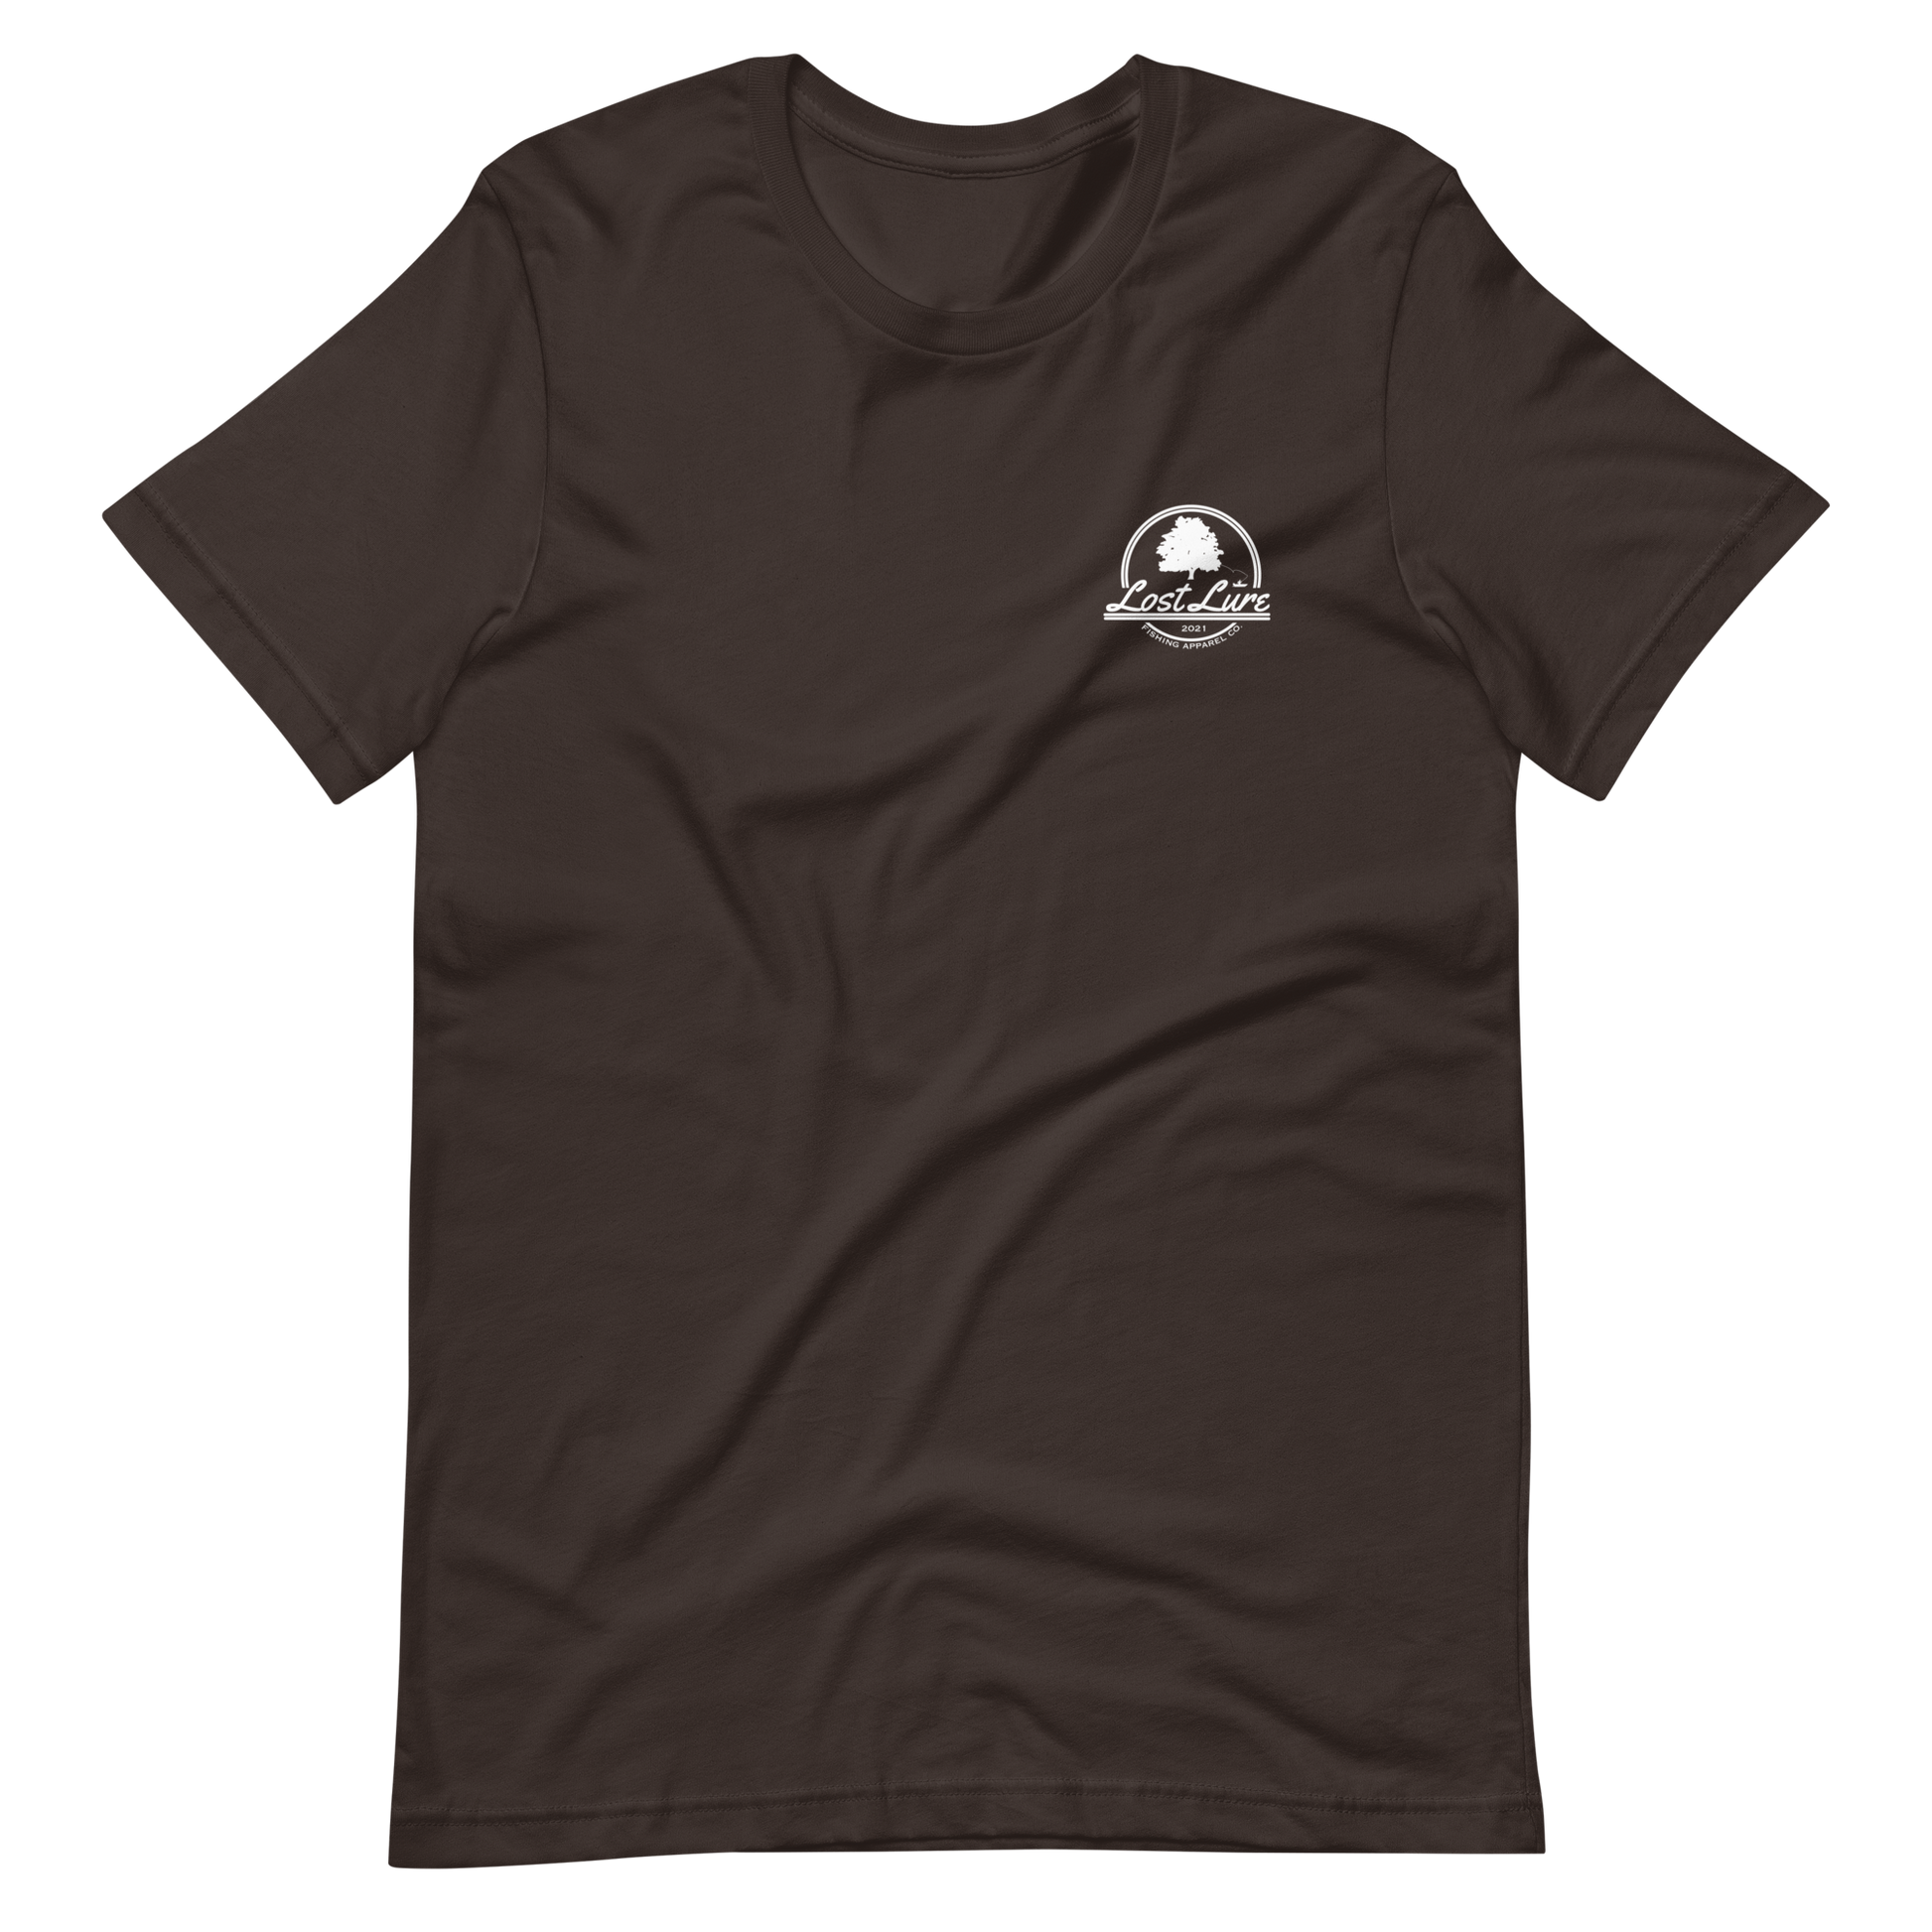 Fly fishing Lost lure shirt. It has a design on the back of the shirt black and white outline a fly fisherman and the Rocky Mountains. Brown fishing shirt, front side